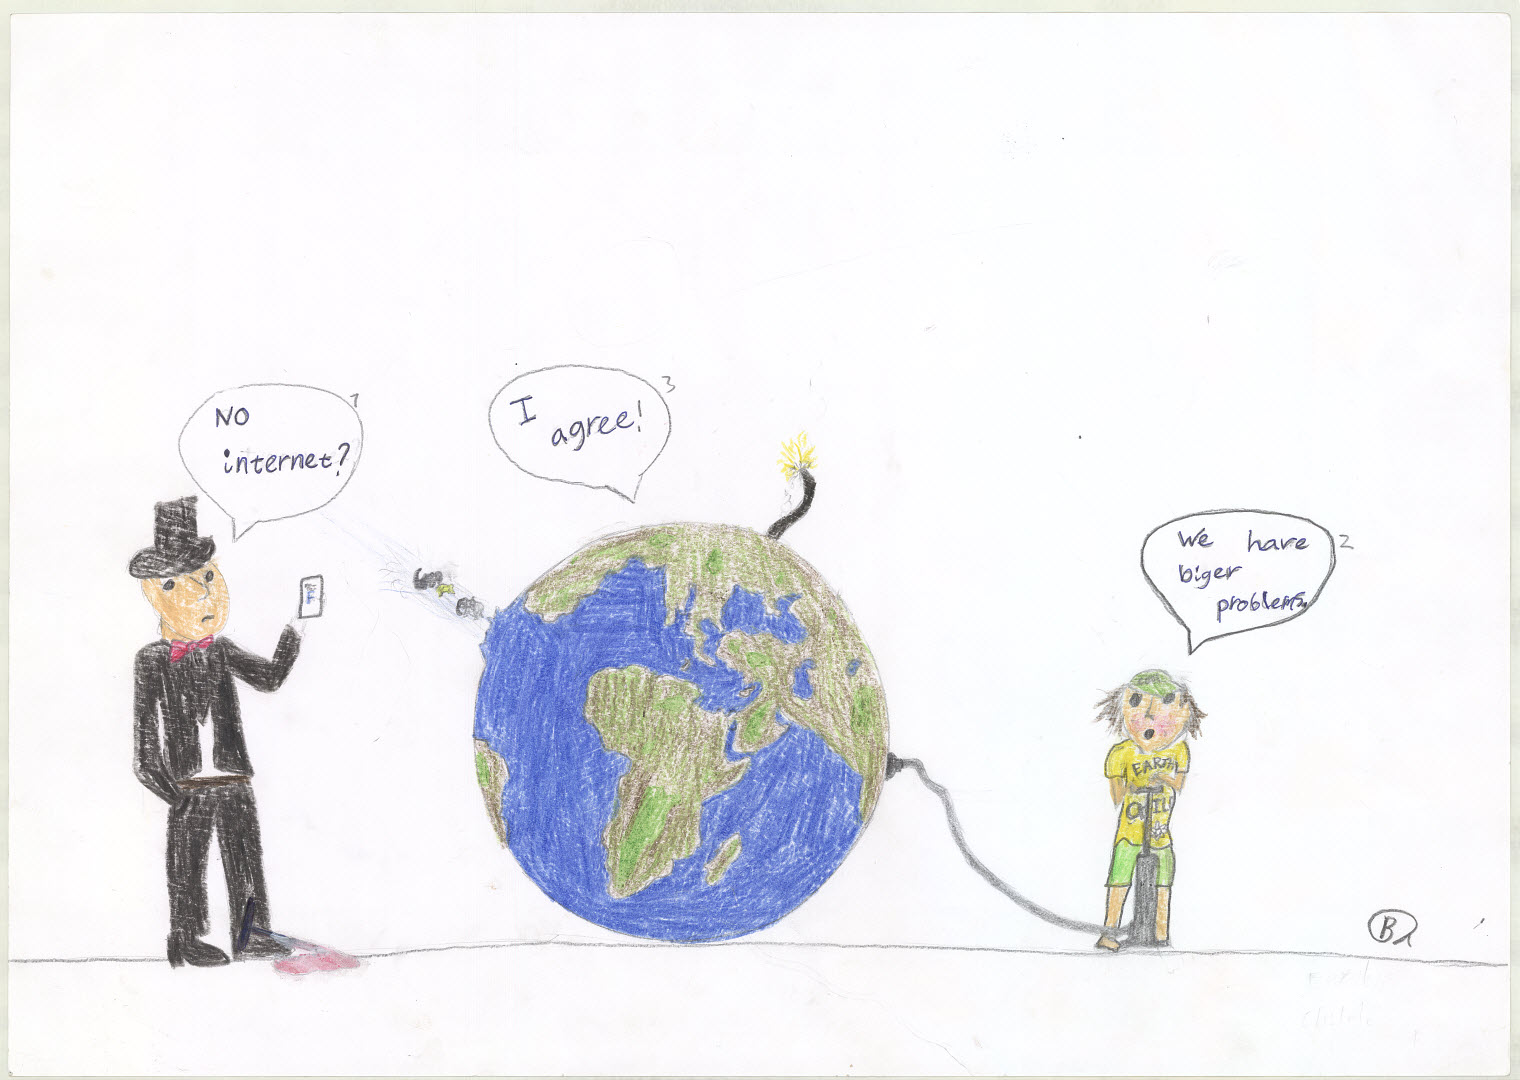 Shows a person holding a cell phone, no Internet. the planet with a fuse and a child indicating we have bigger problems